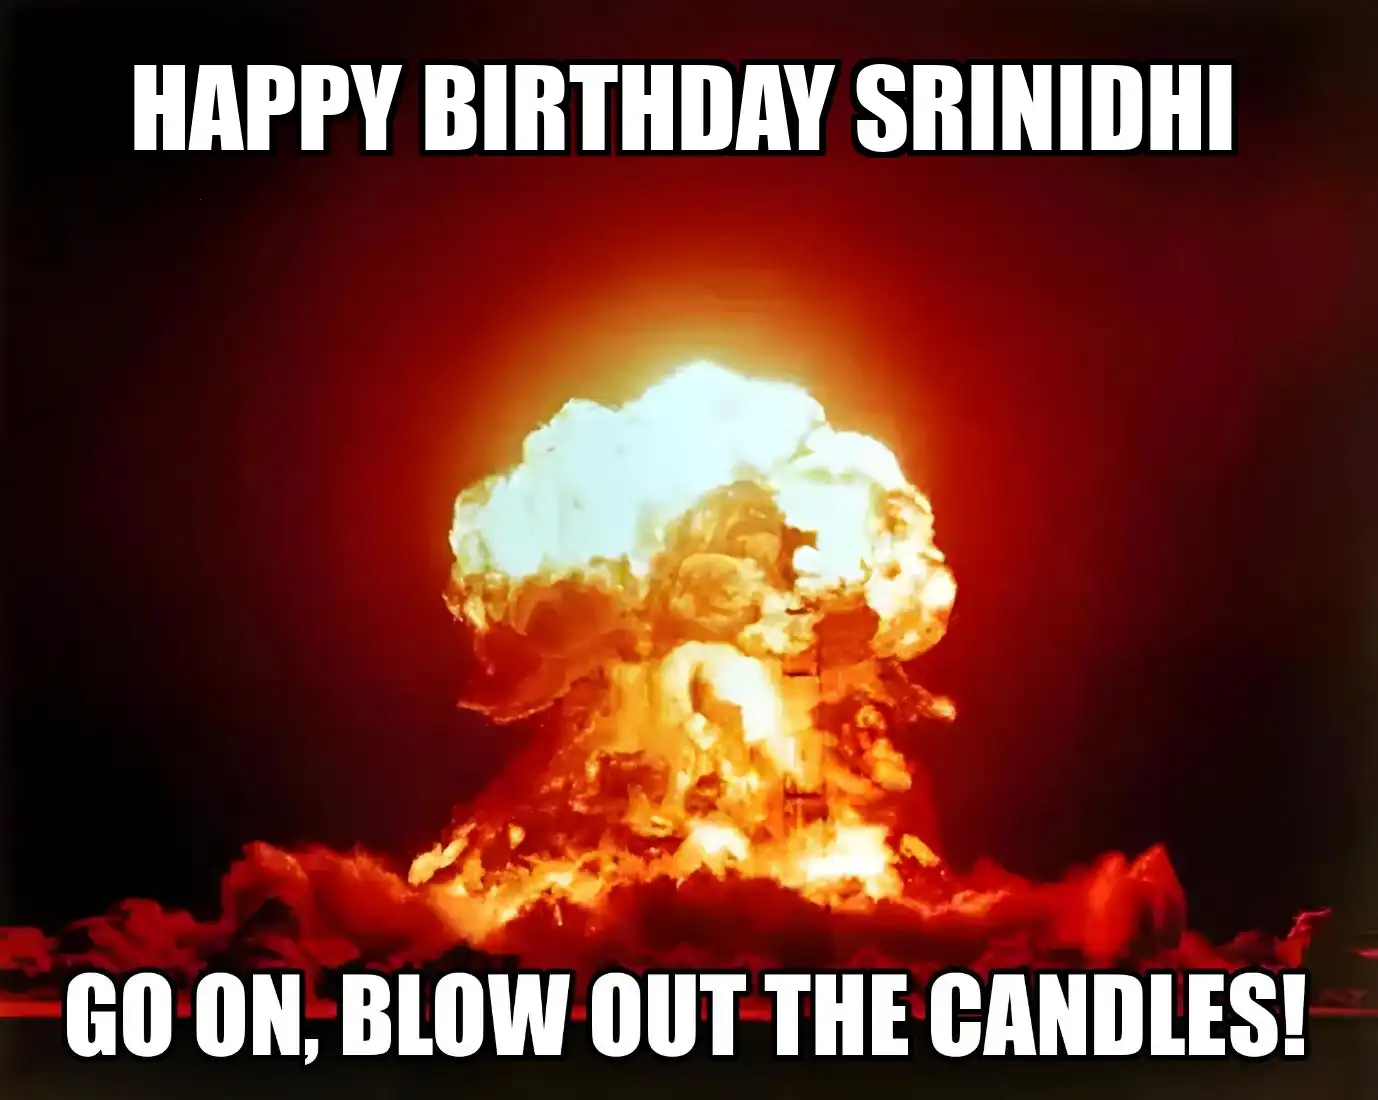 Happy Birthday Srinidhi Go On Blow Out The Candles Meme